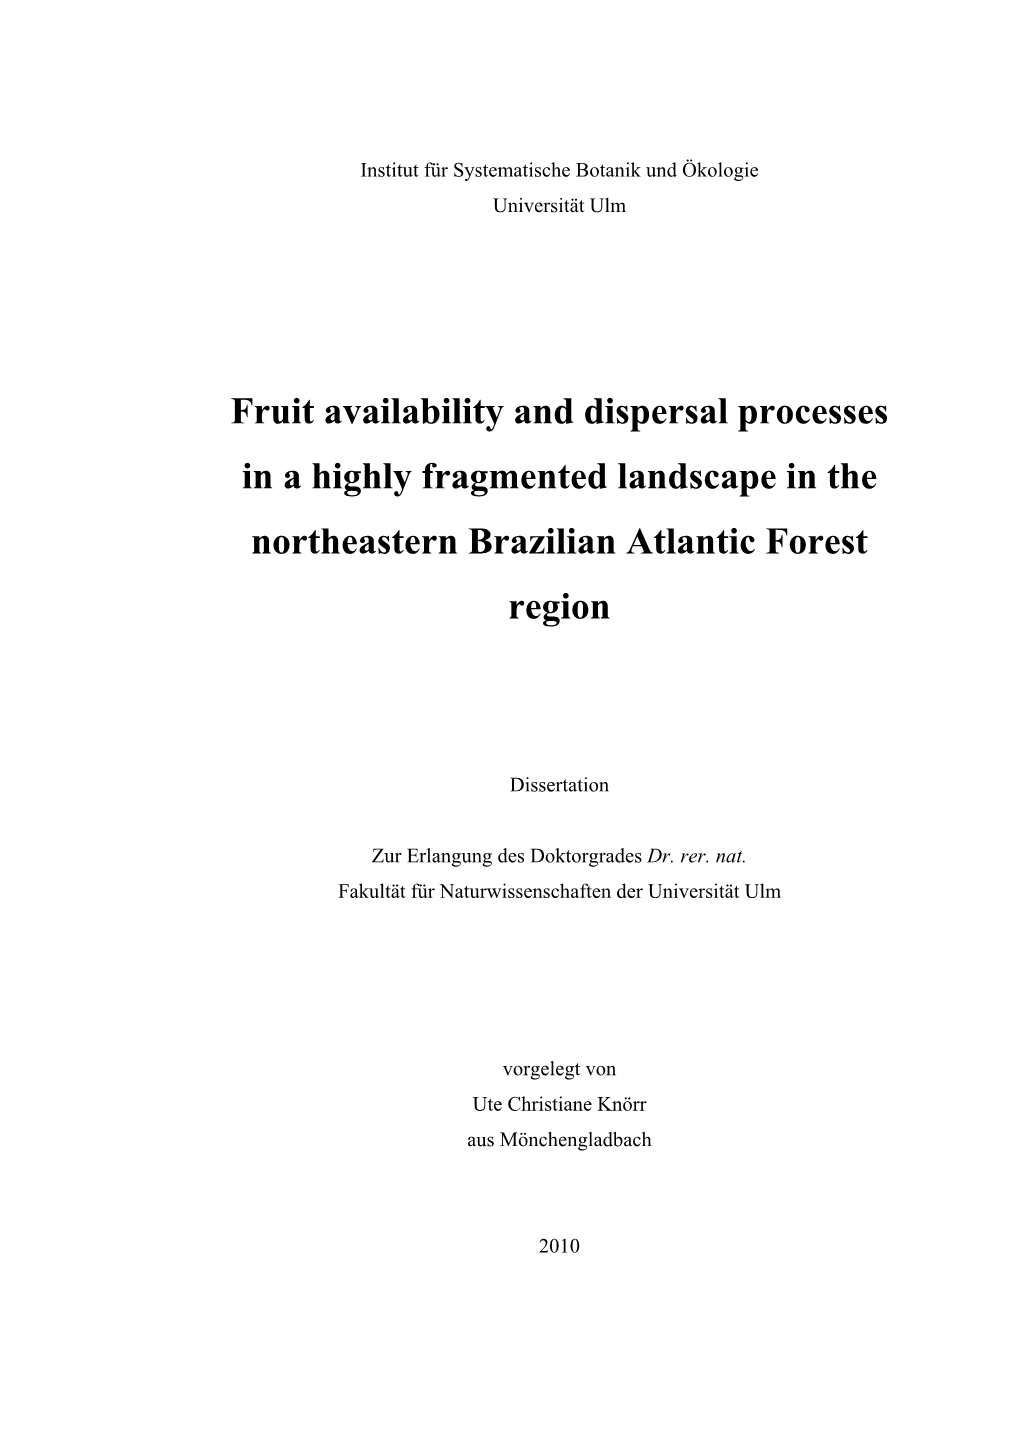 Fruit Availability and Dispersal Processes in a Highly Fragmented Landscape in the Northeastern Brazilian Atlantic Forest Region